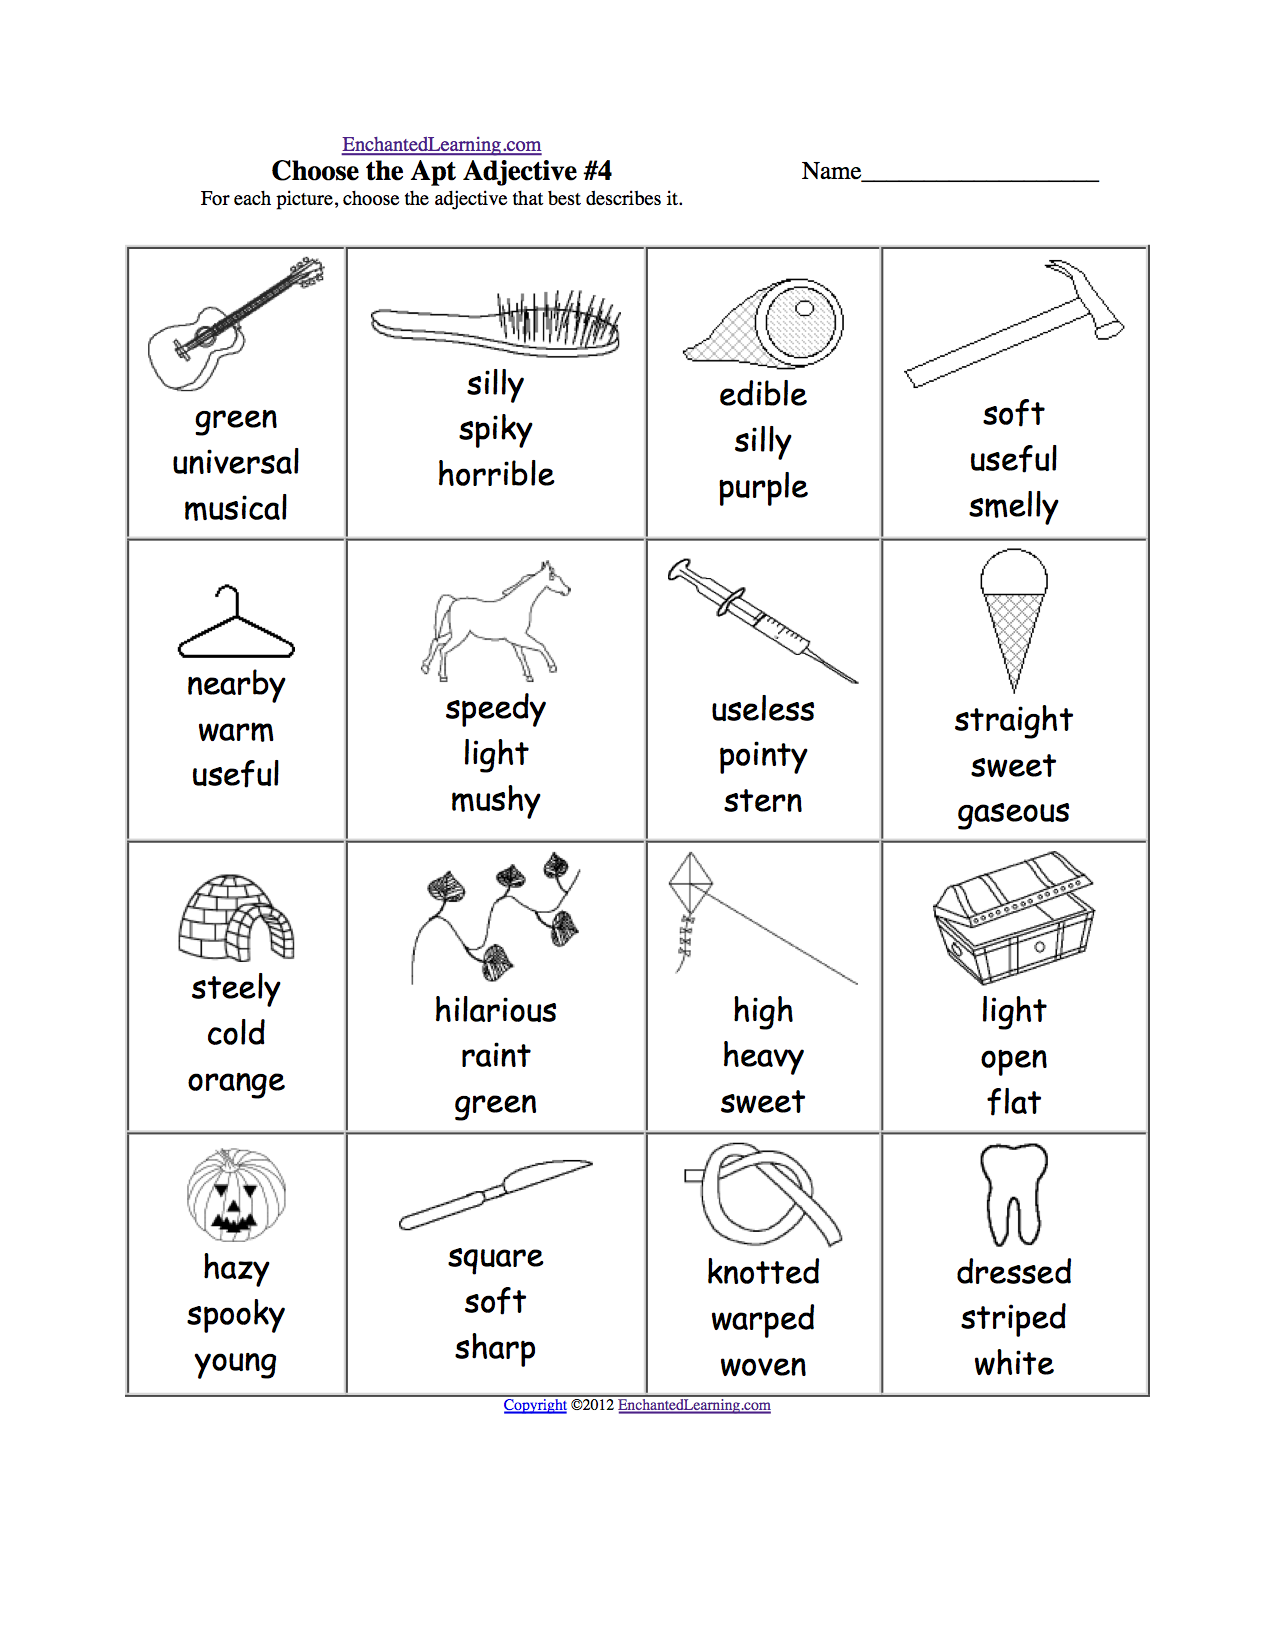 Adjective and A List of Adjectives: EnchantedLearning.com